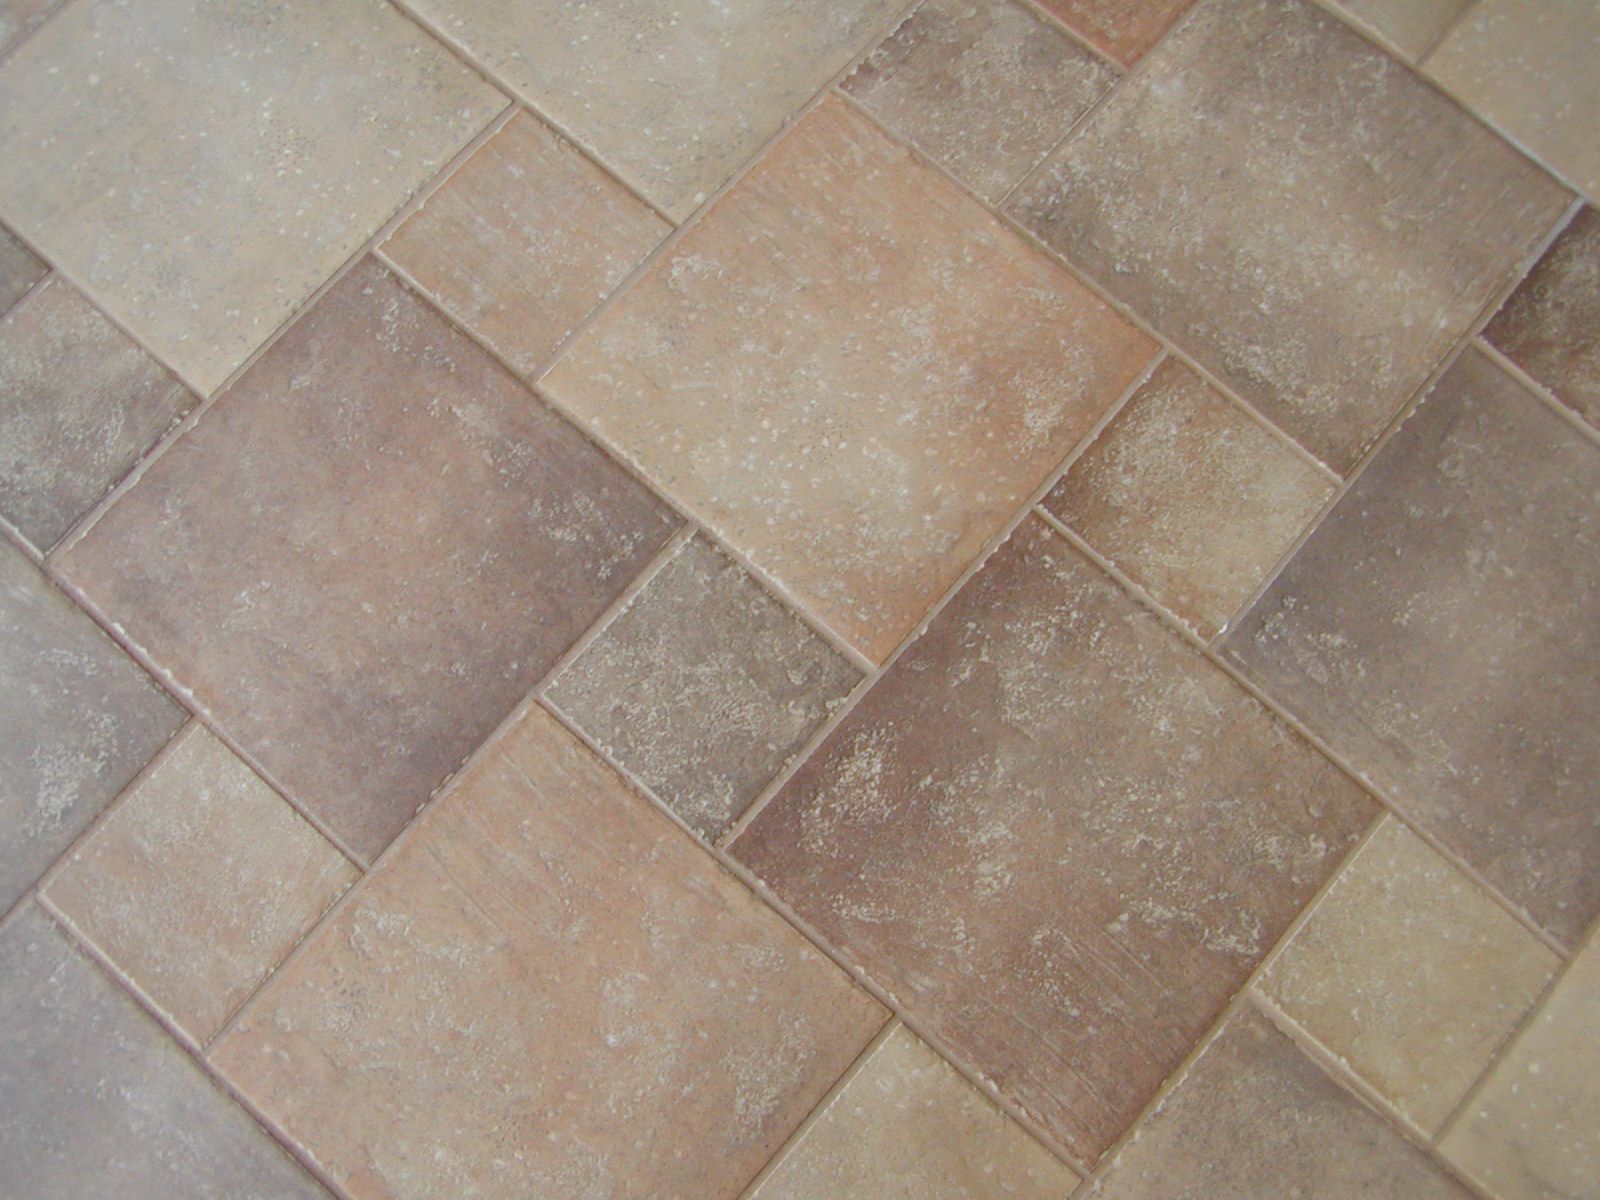 Different Sized And Asymmetrically Arranged Tiles On Floor 182663269 588be6233df78caebcbe11dc 